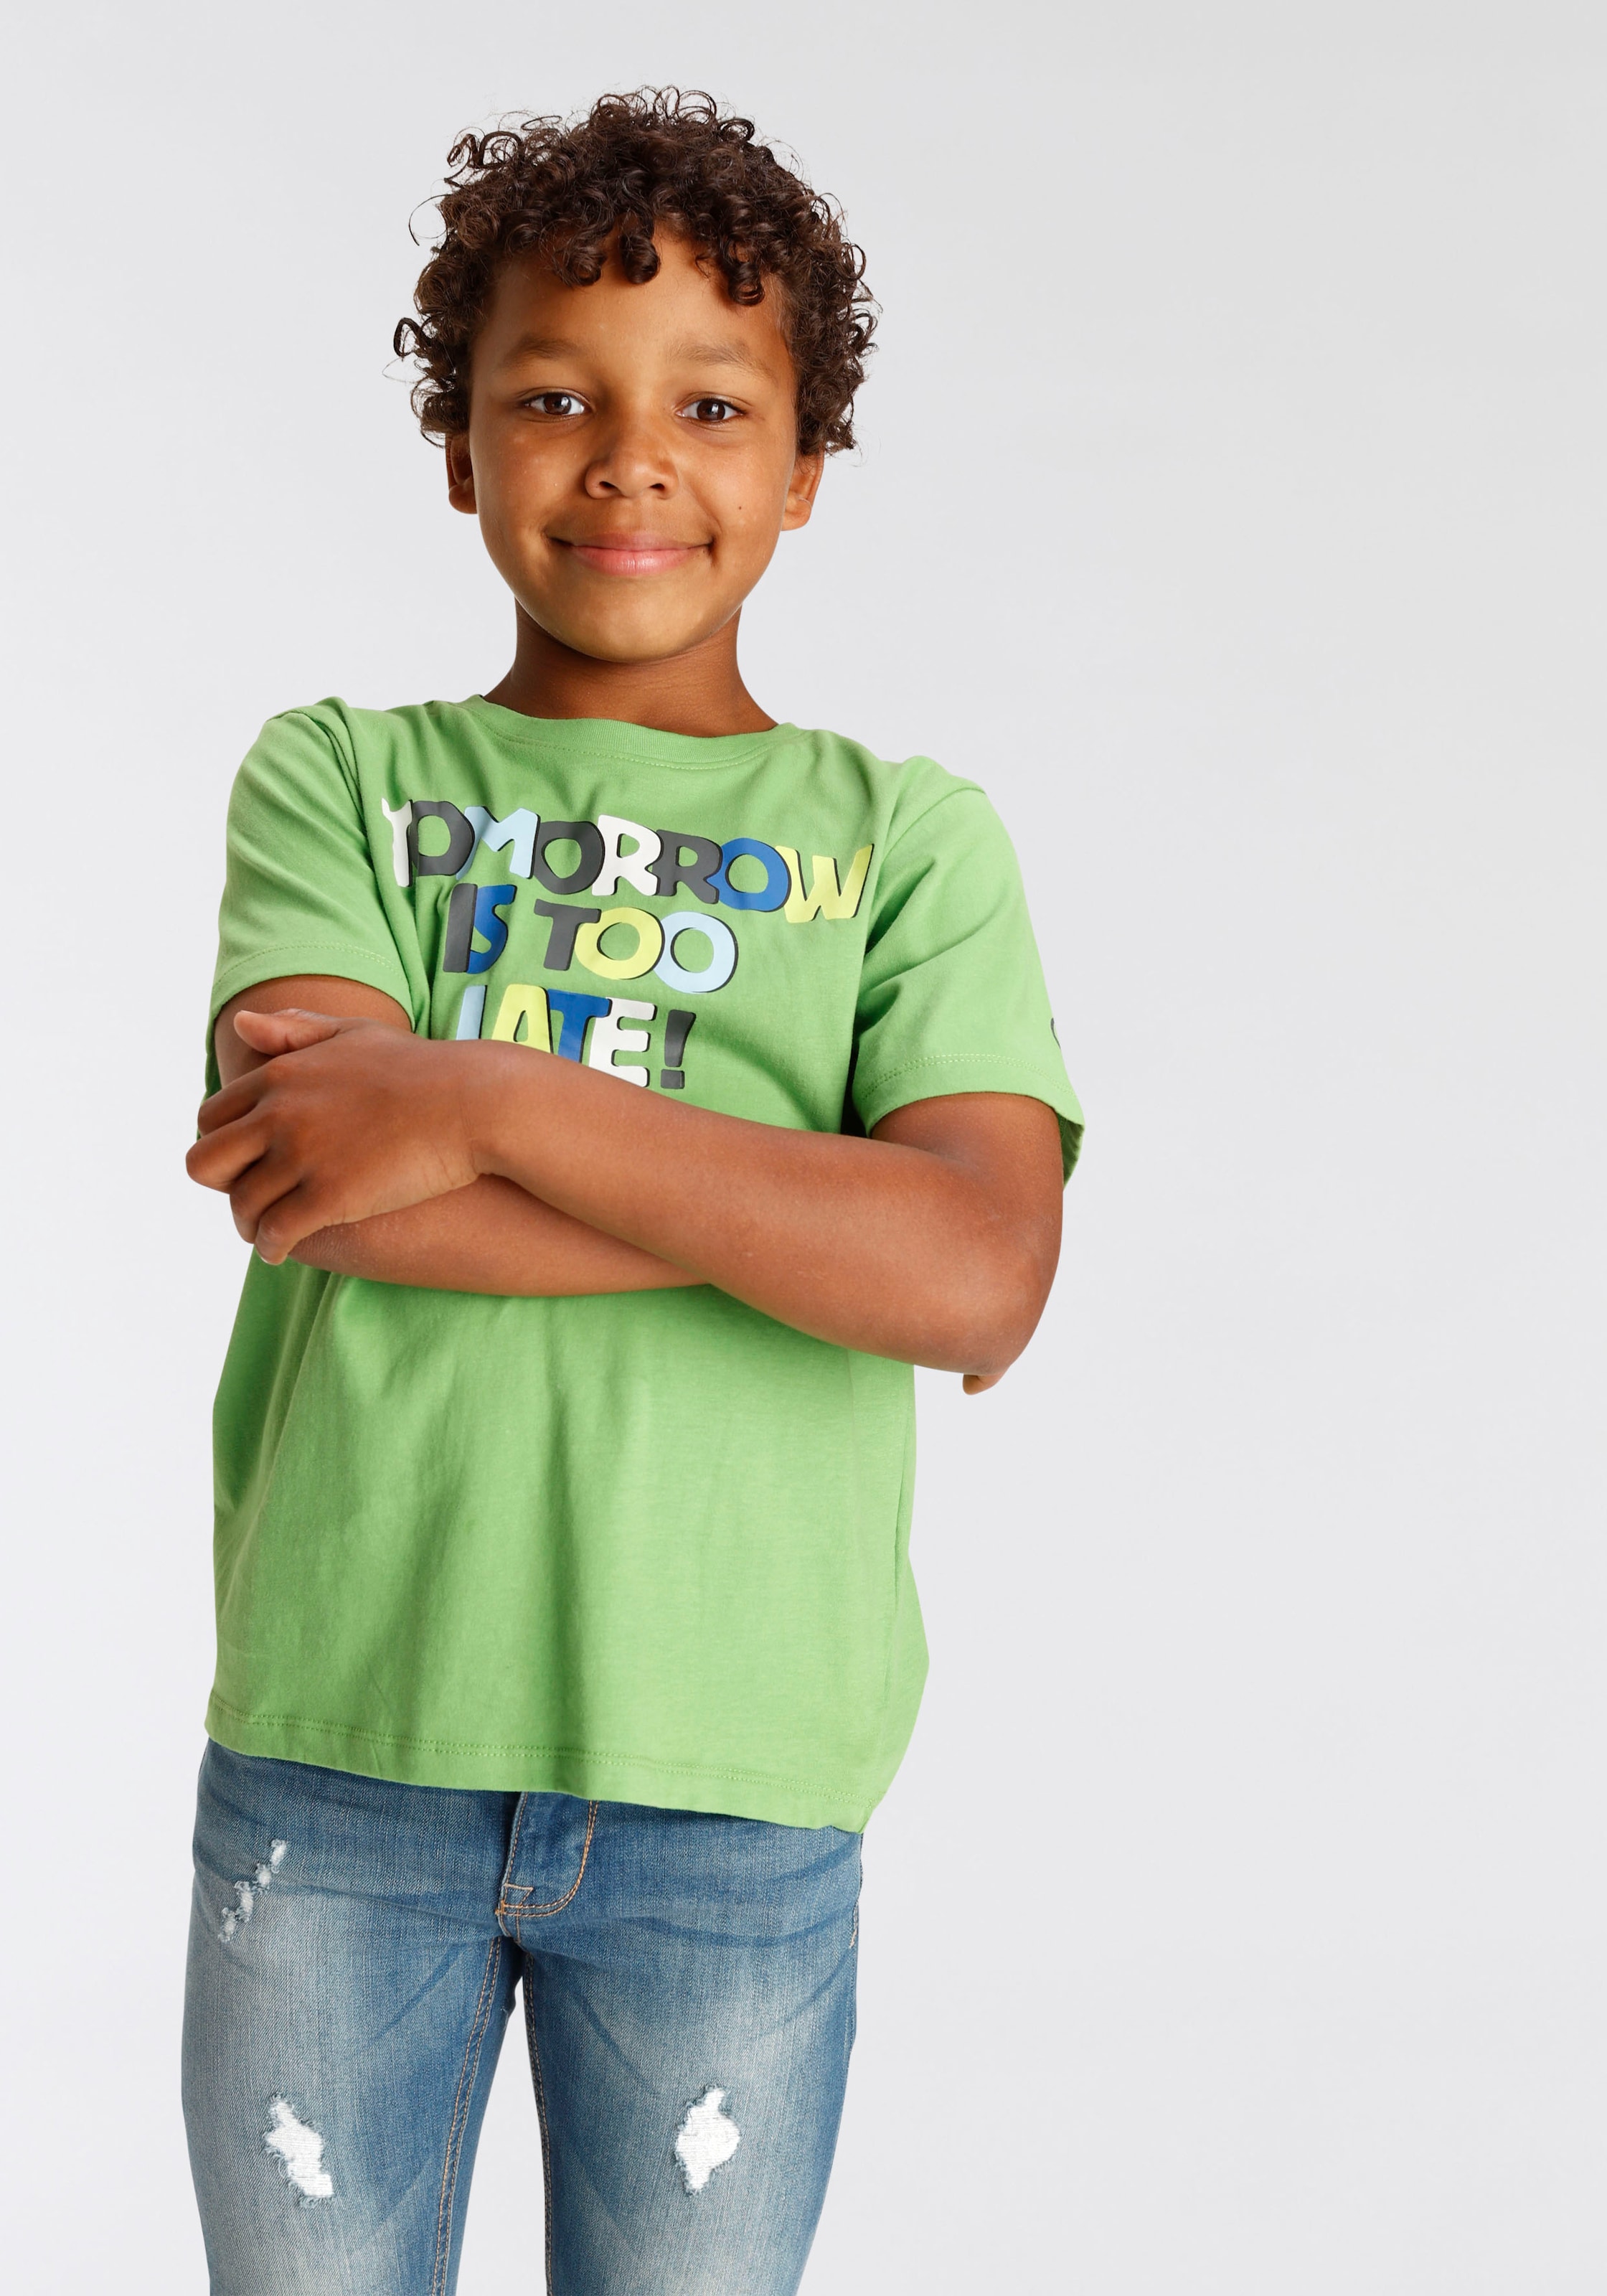 LATE«, OTTO IS bei T-Shirt Spruch KIDSWORLD TOO »TOMORROW